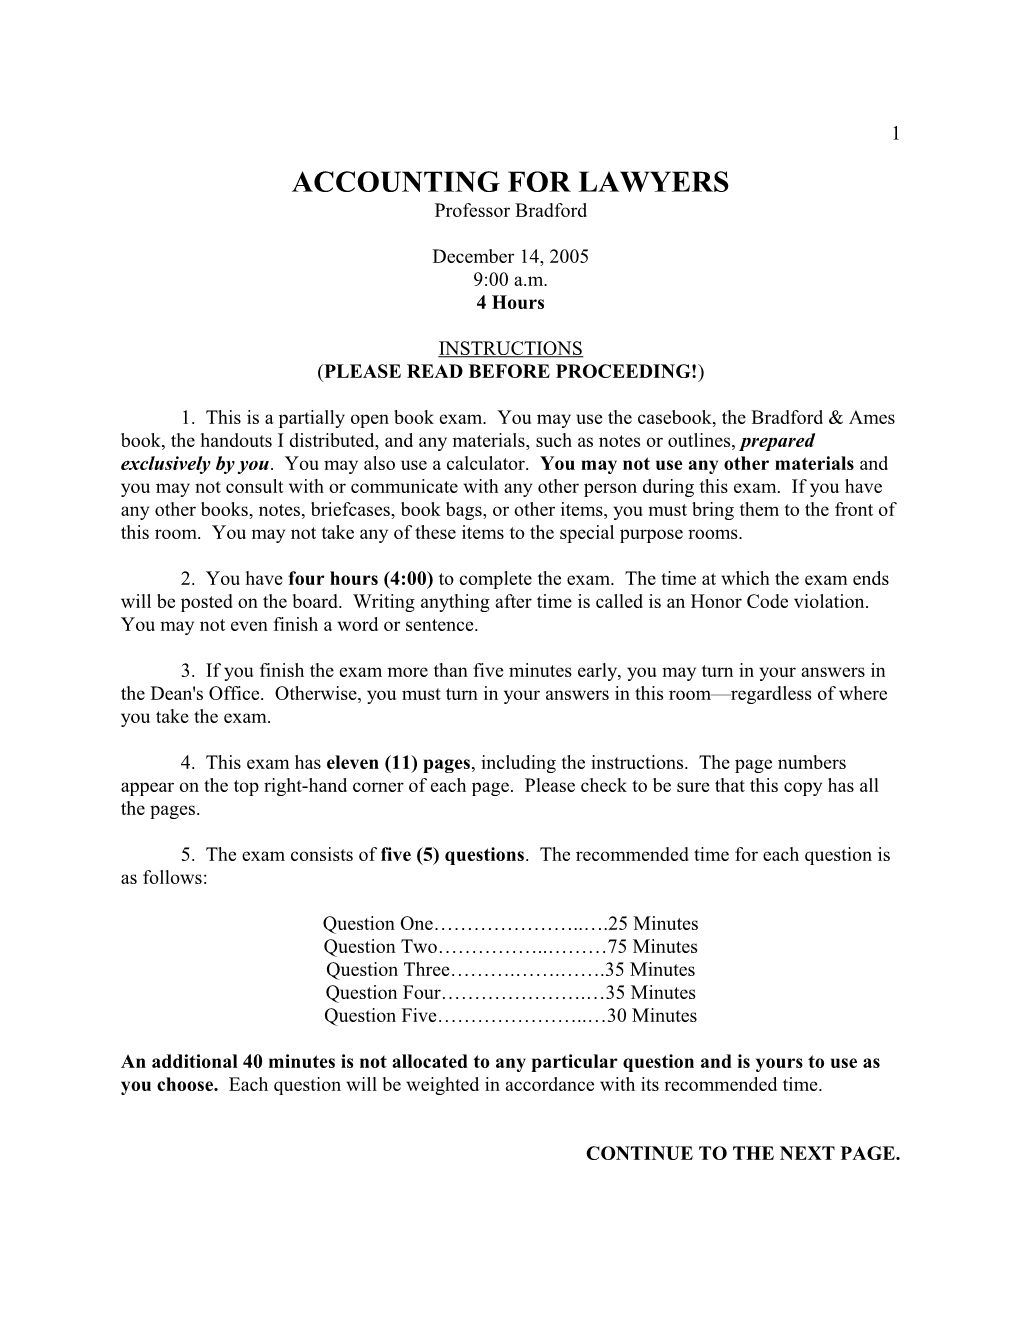 Accounting for Lawyers s1